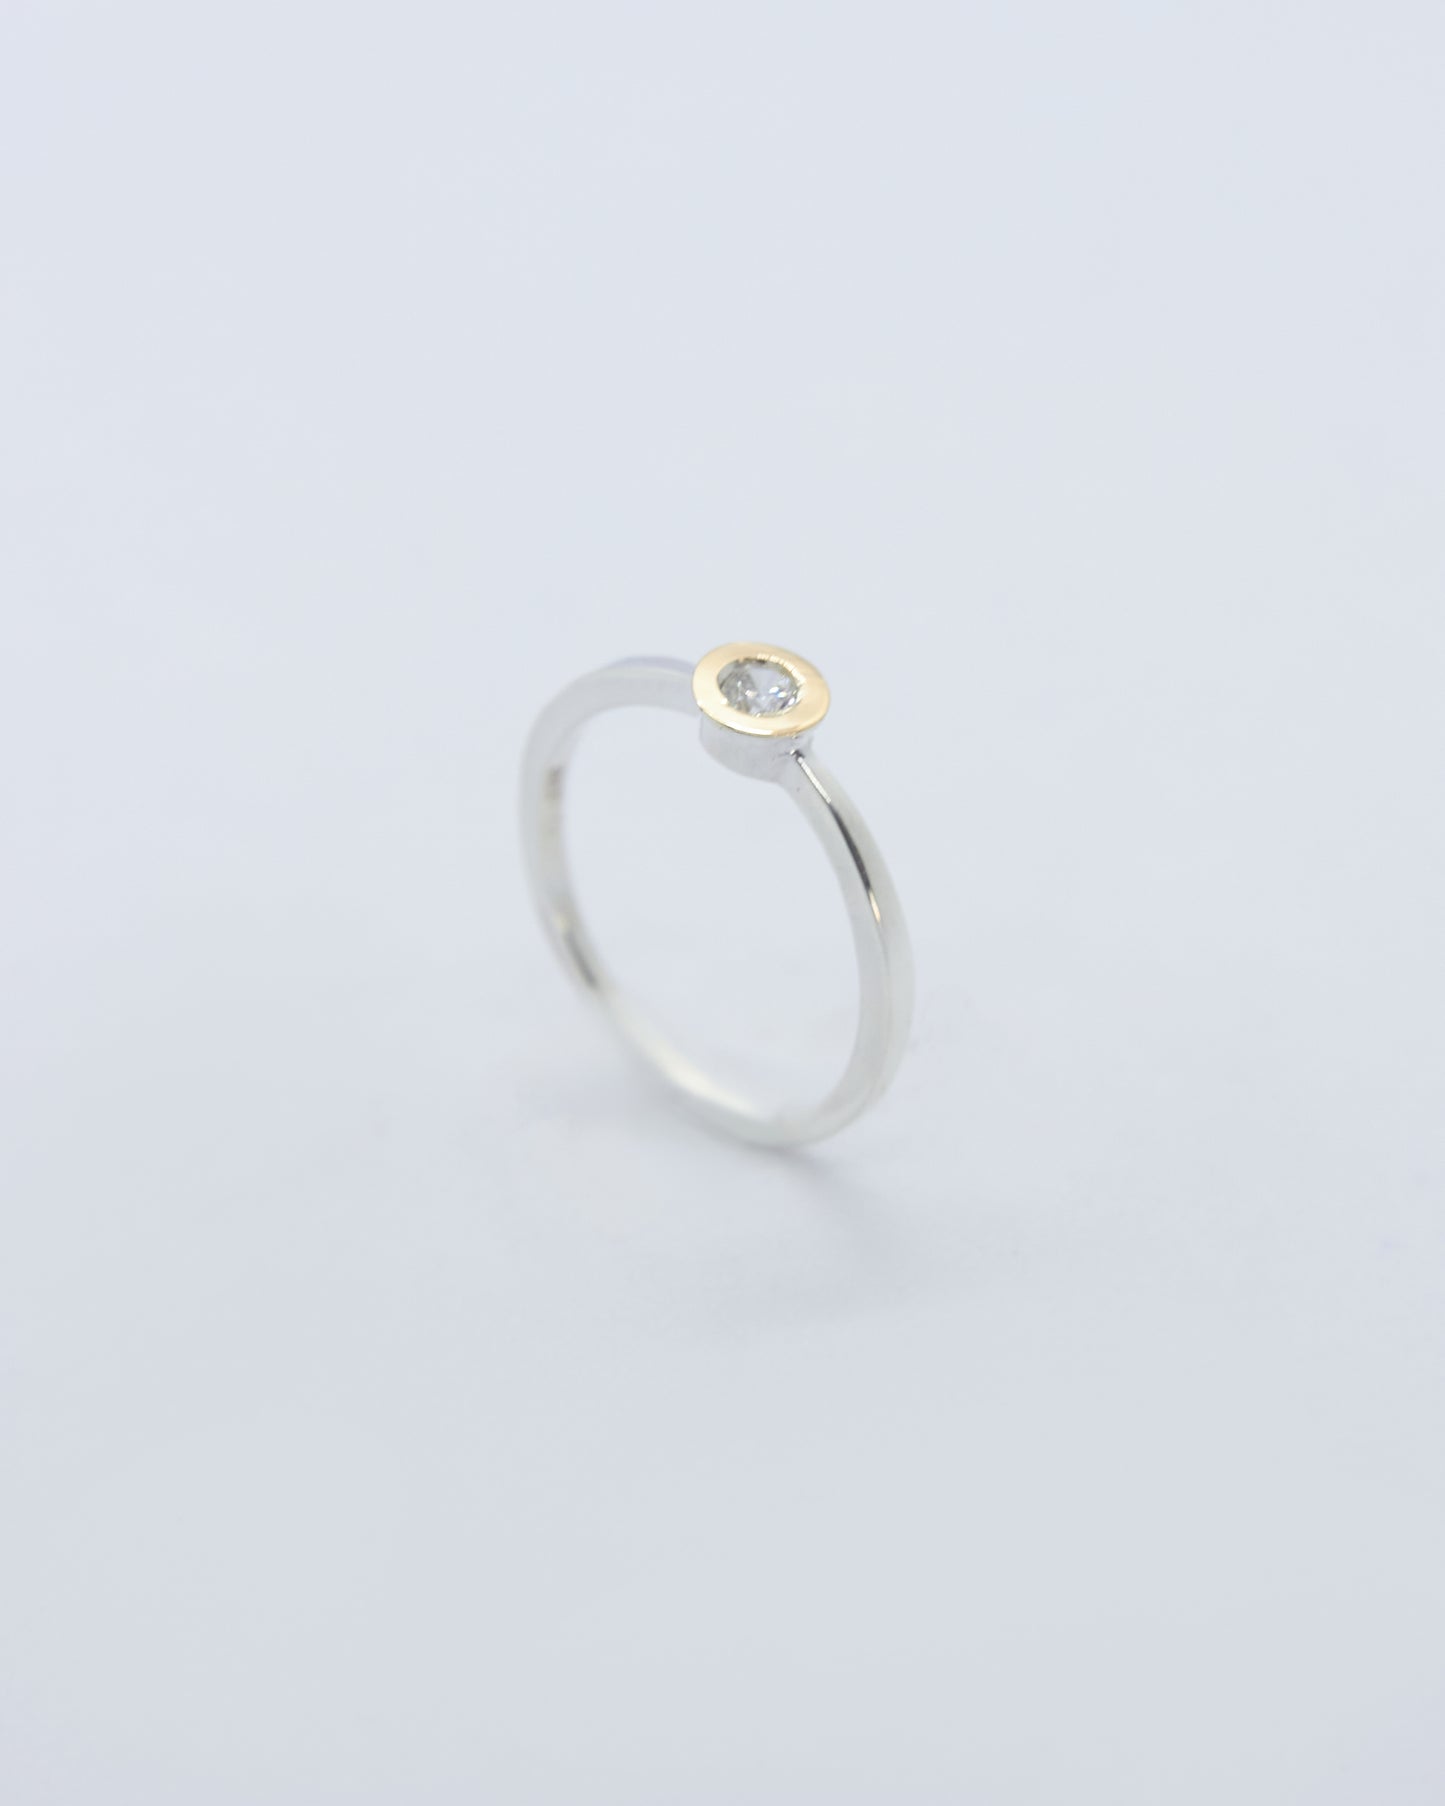 Captivating Ring | 925 Sterling Silver Ring with Zircon and 18k Gold Leaf